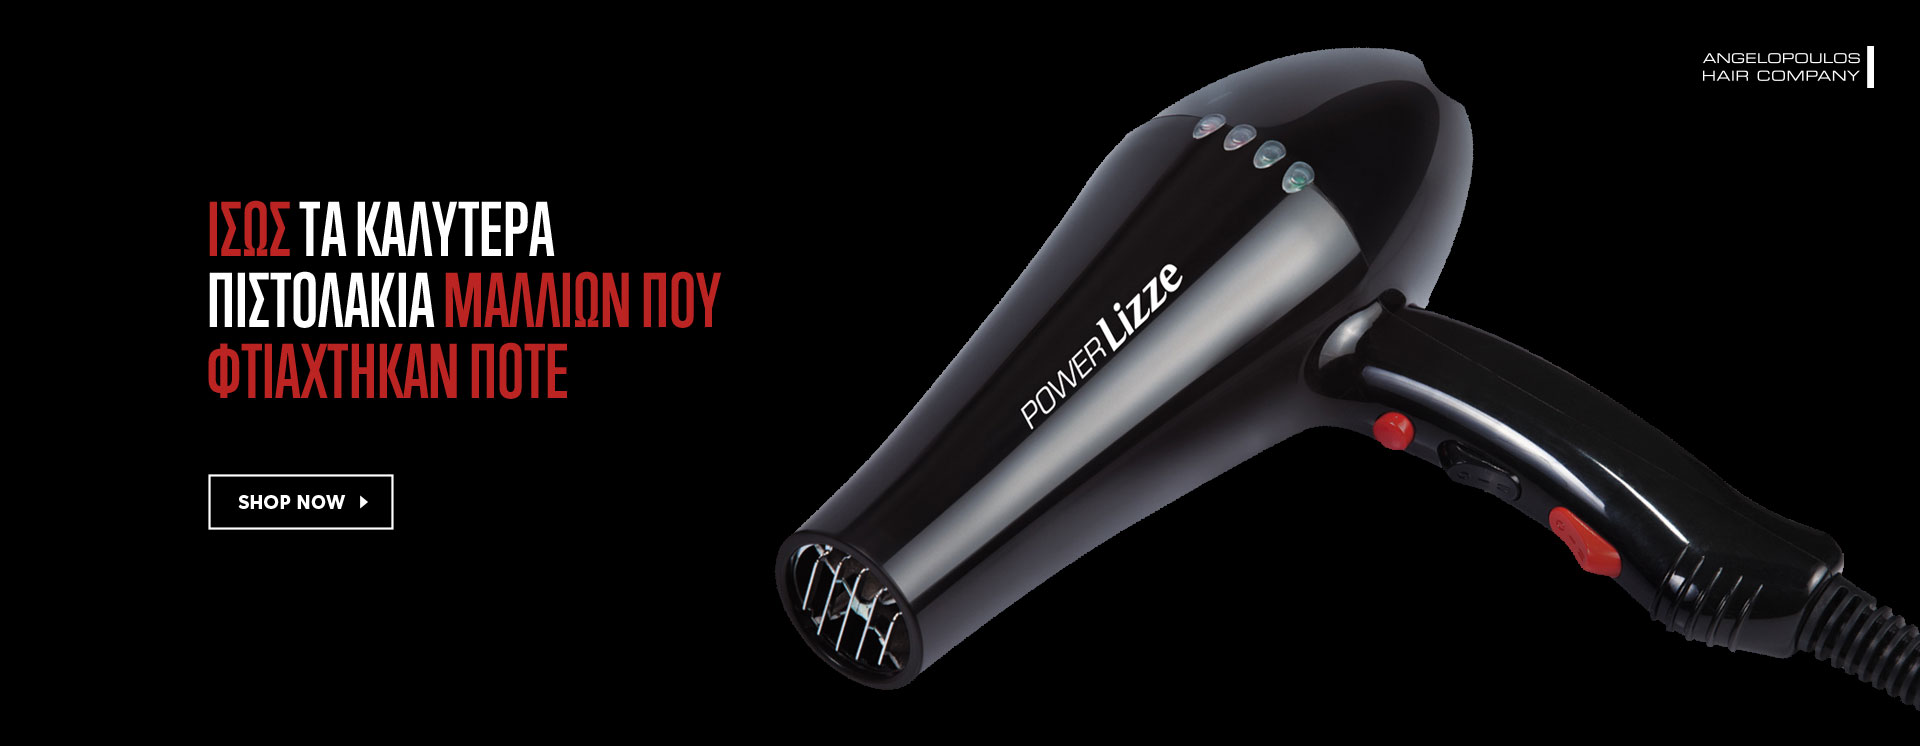 Hair Dryers - Go Professional - NG